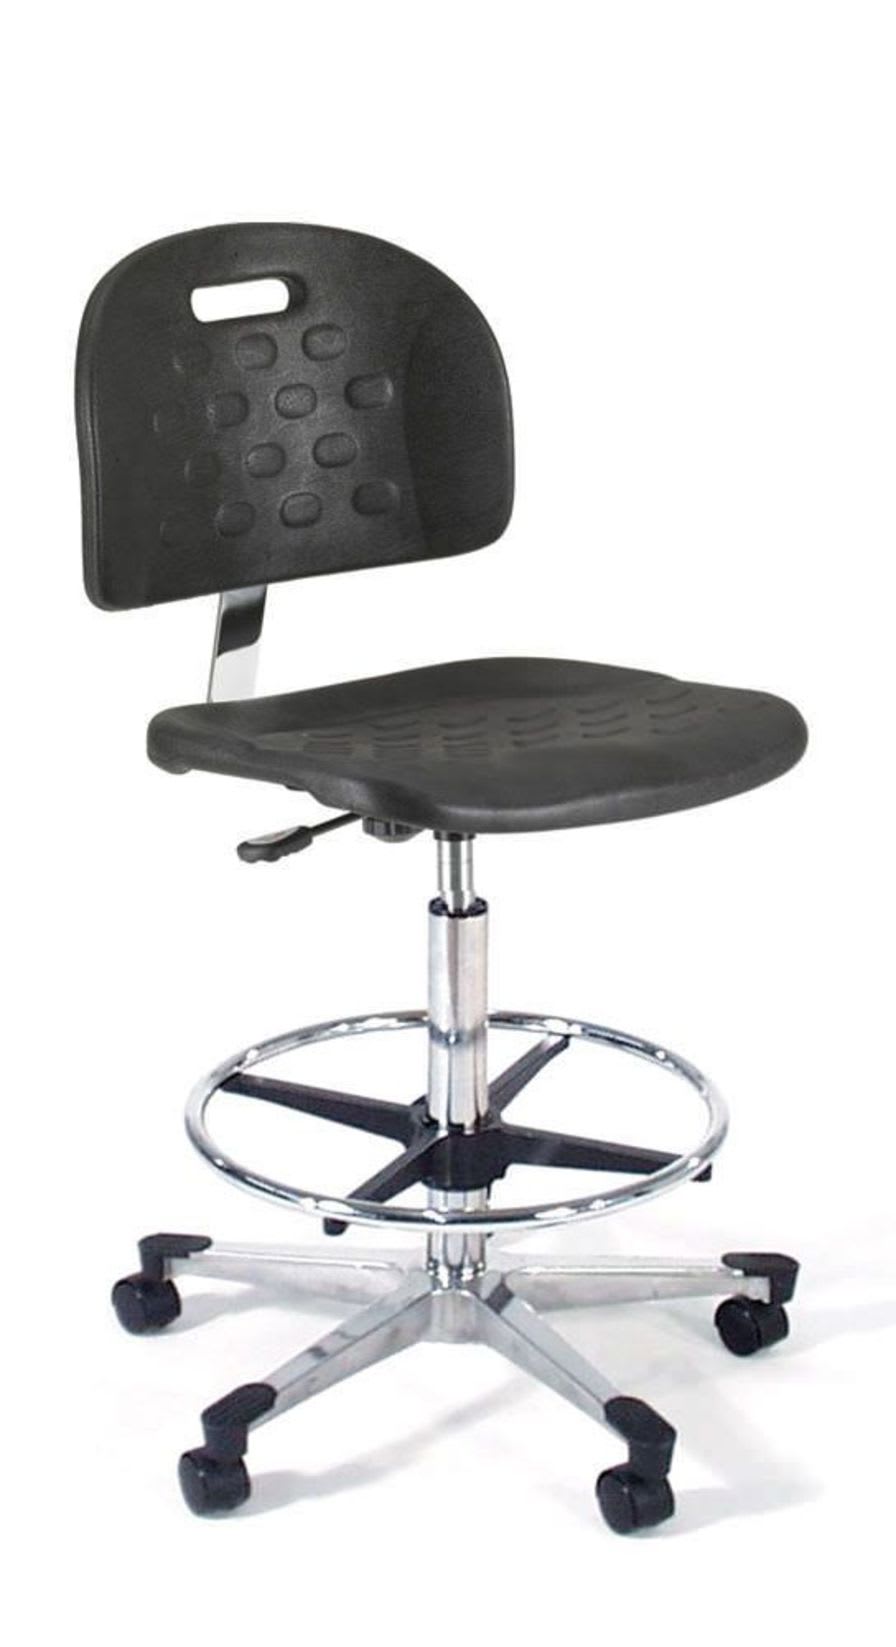 Medical stool / height-adjustable / on casters / with backrest 842 Intensa